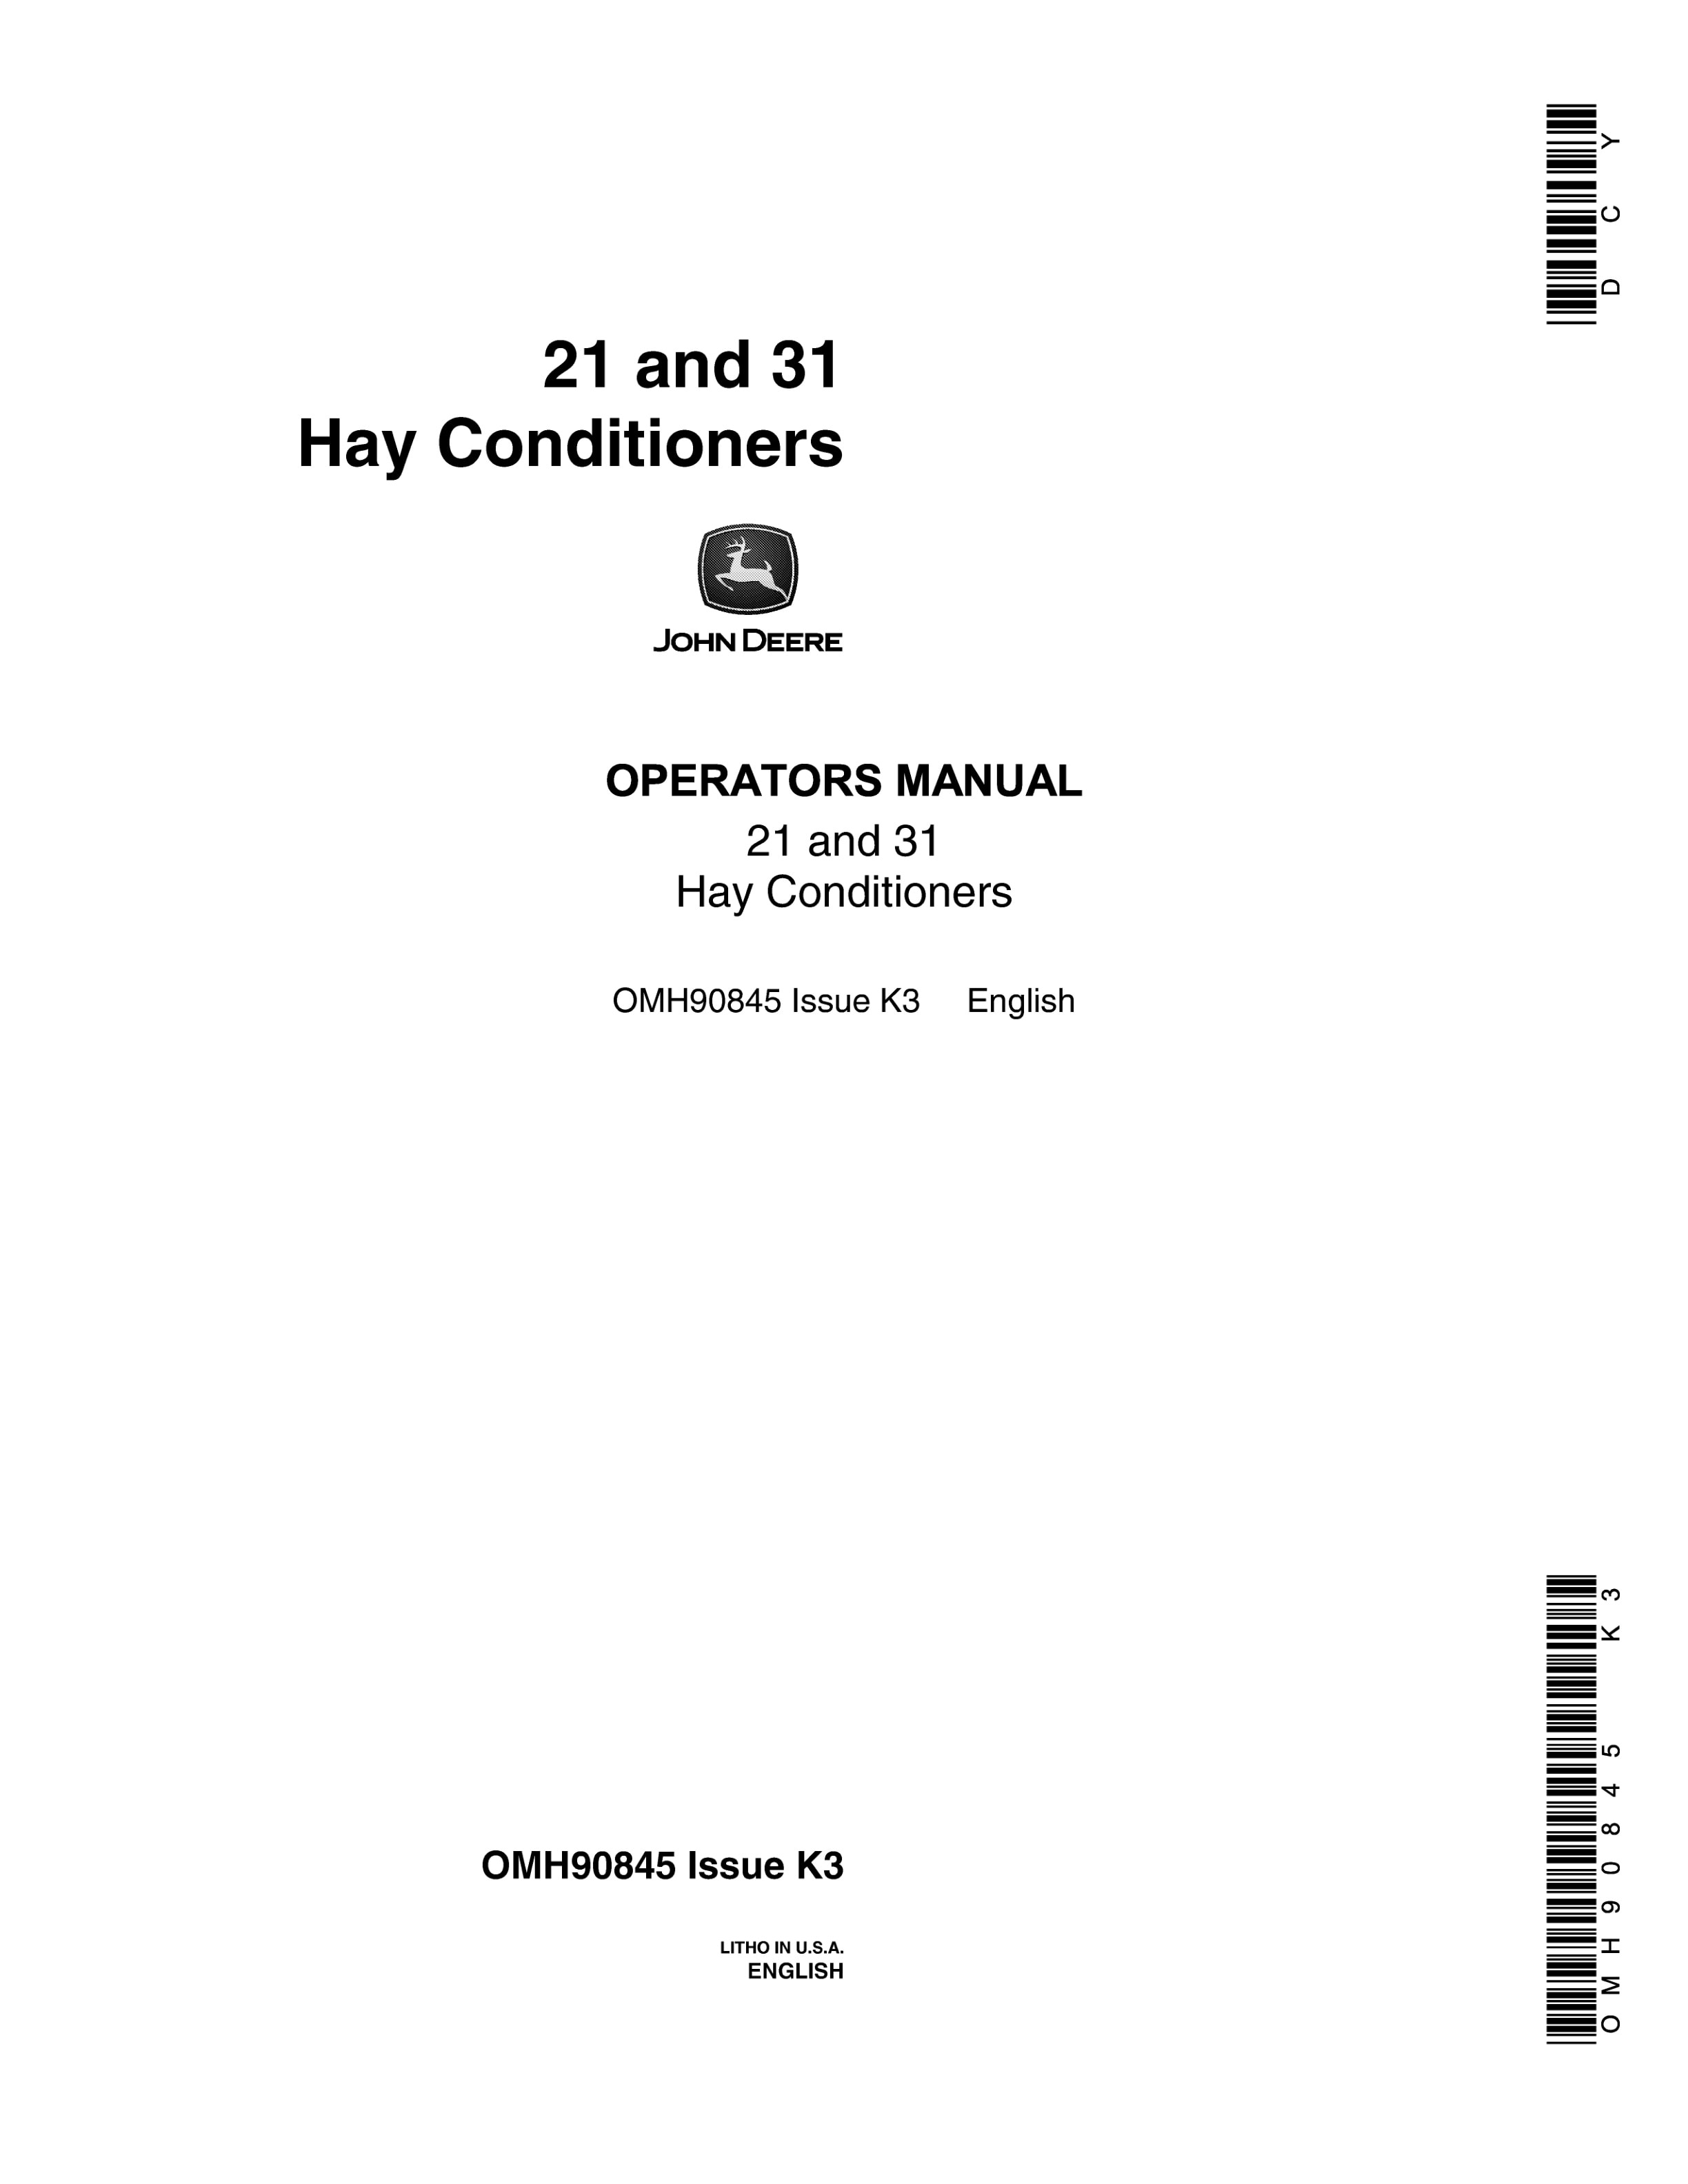 John Deere 21 and 31 HAY CONDITIONERS Operator Manual OMH90845 1